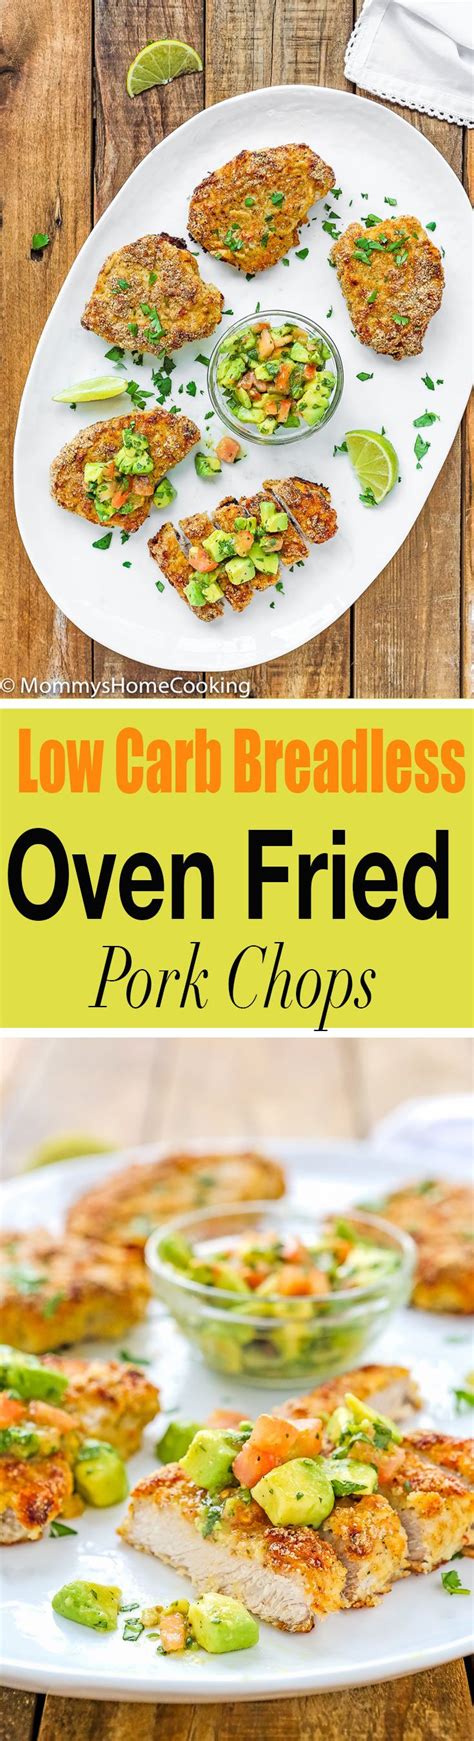 Sear the pork chops on the stovetop for just a few minutes until they brown. Skinny Oven Fried Pork Chops | Recipe | Fries in the oven, Fried pork chops, Fried pork